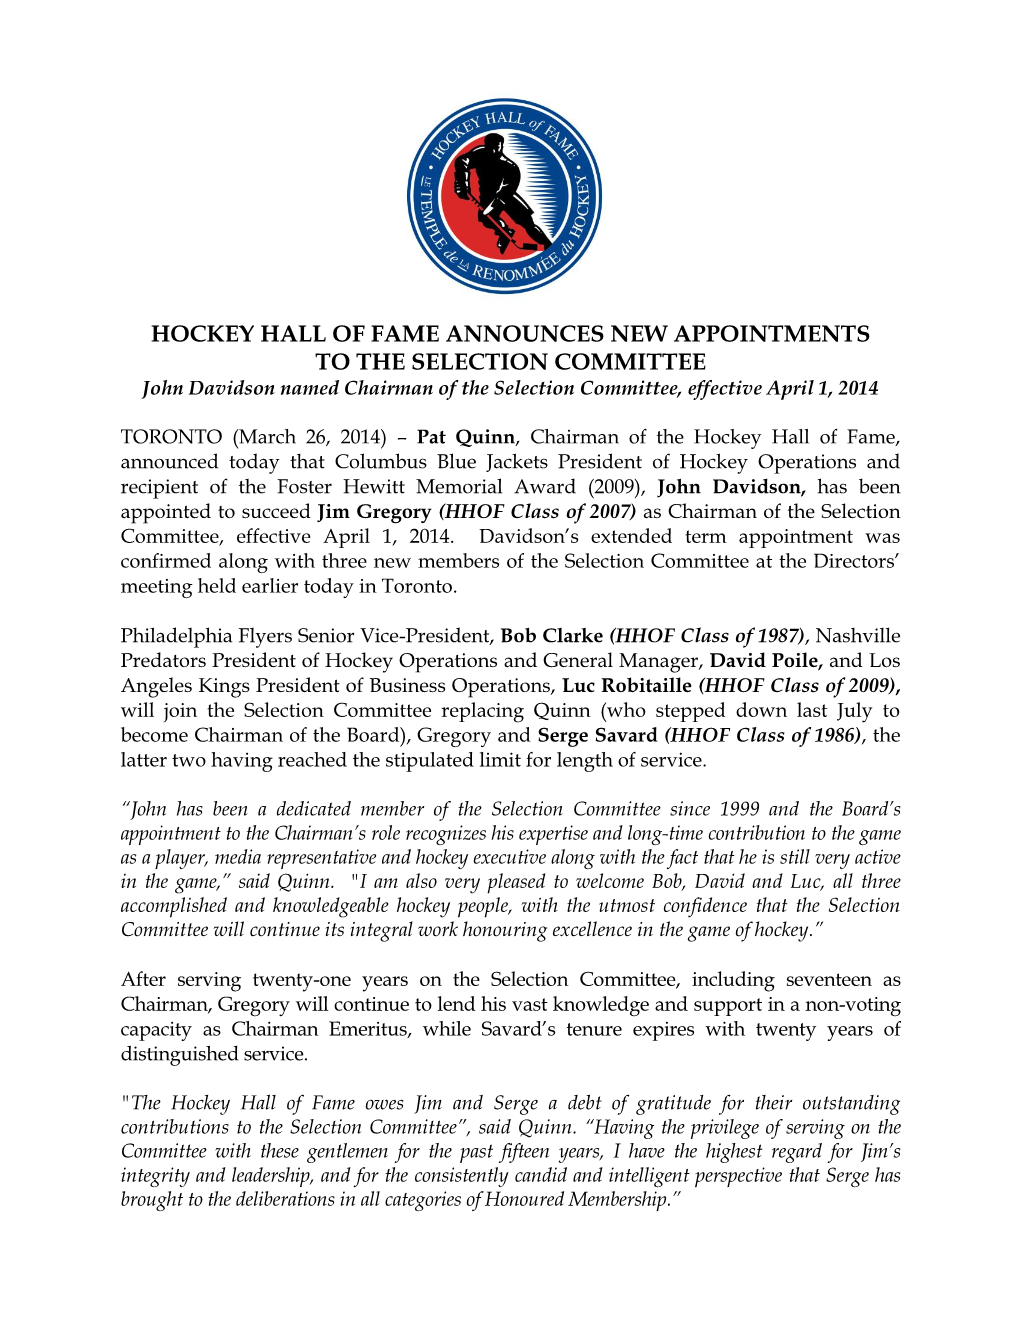 HOCKEY HALL of FAME ANNOUNCES NEW APPOINTMENTS to the SELECTION COMMITTEE John Davidson Named Chairman of the Selection Committee, Effective April 1, 2014